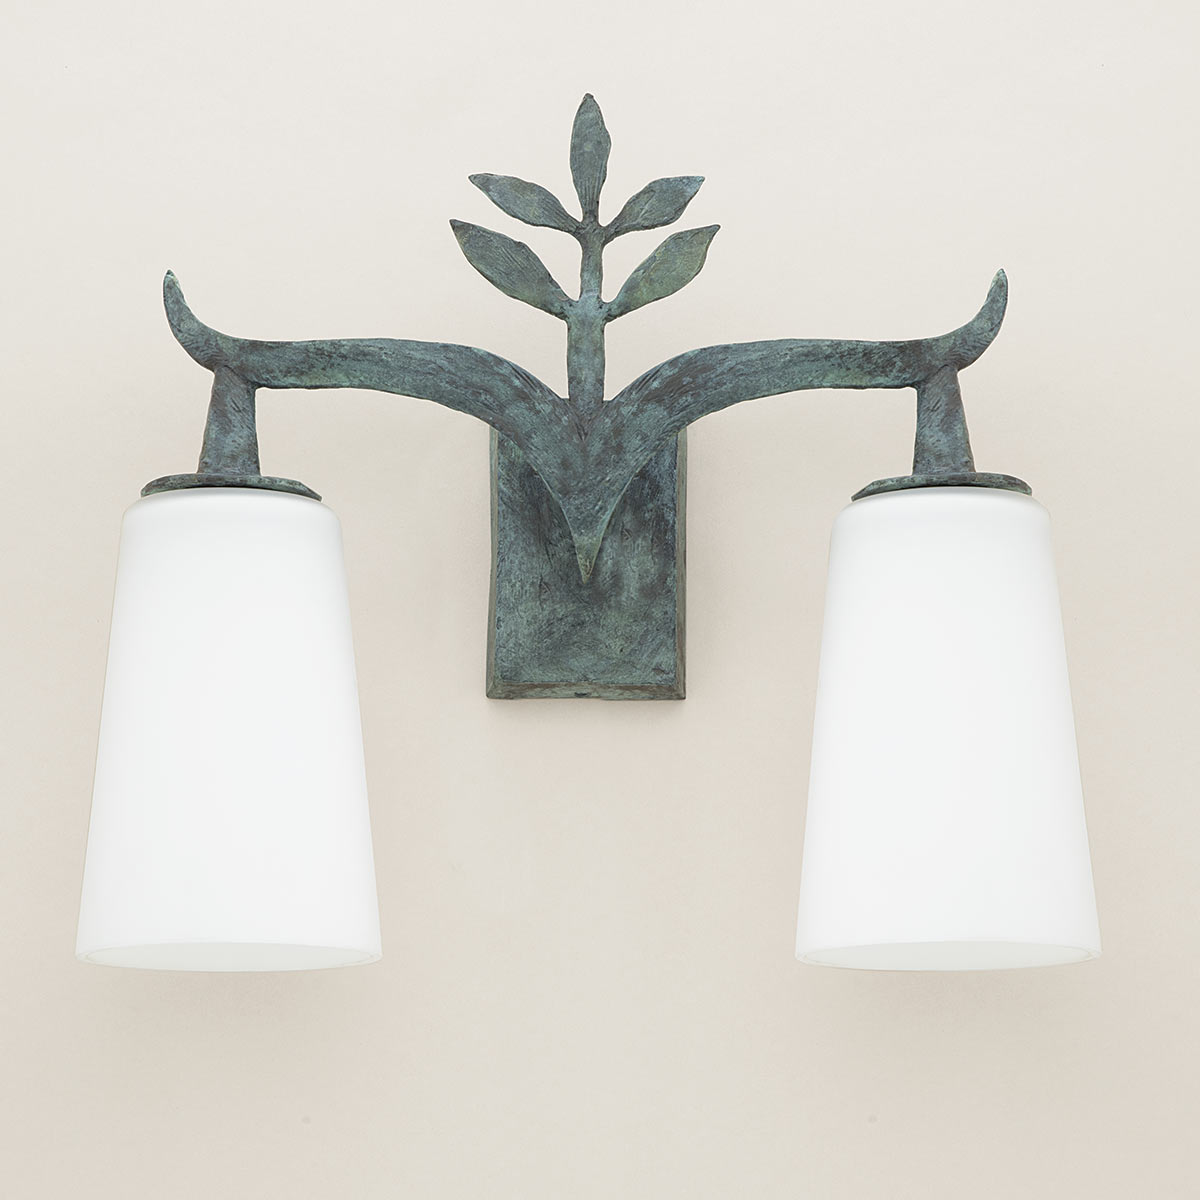 Floral outdoor wall lamp with leaf decor made of cast bronze Alia